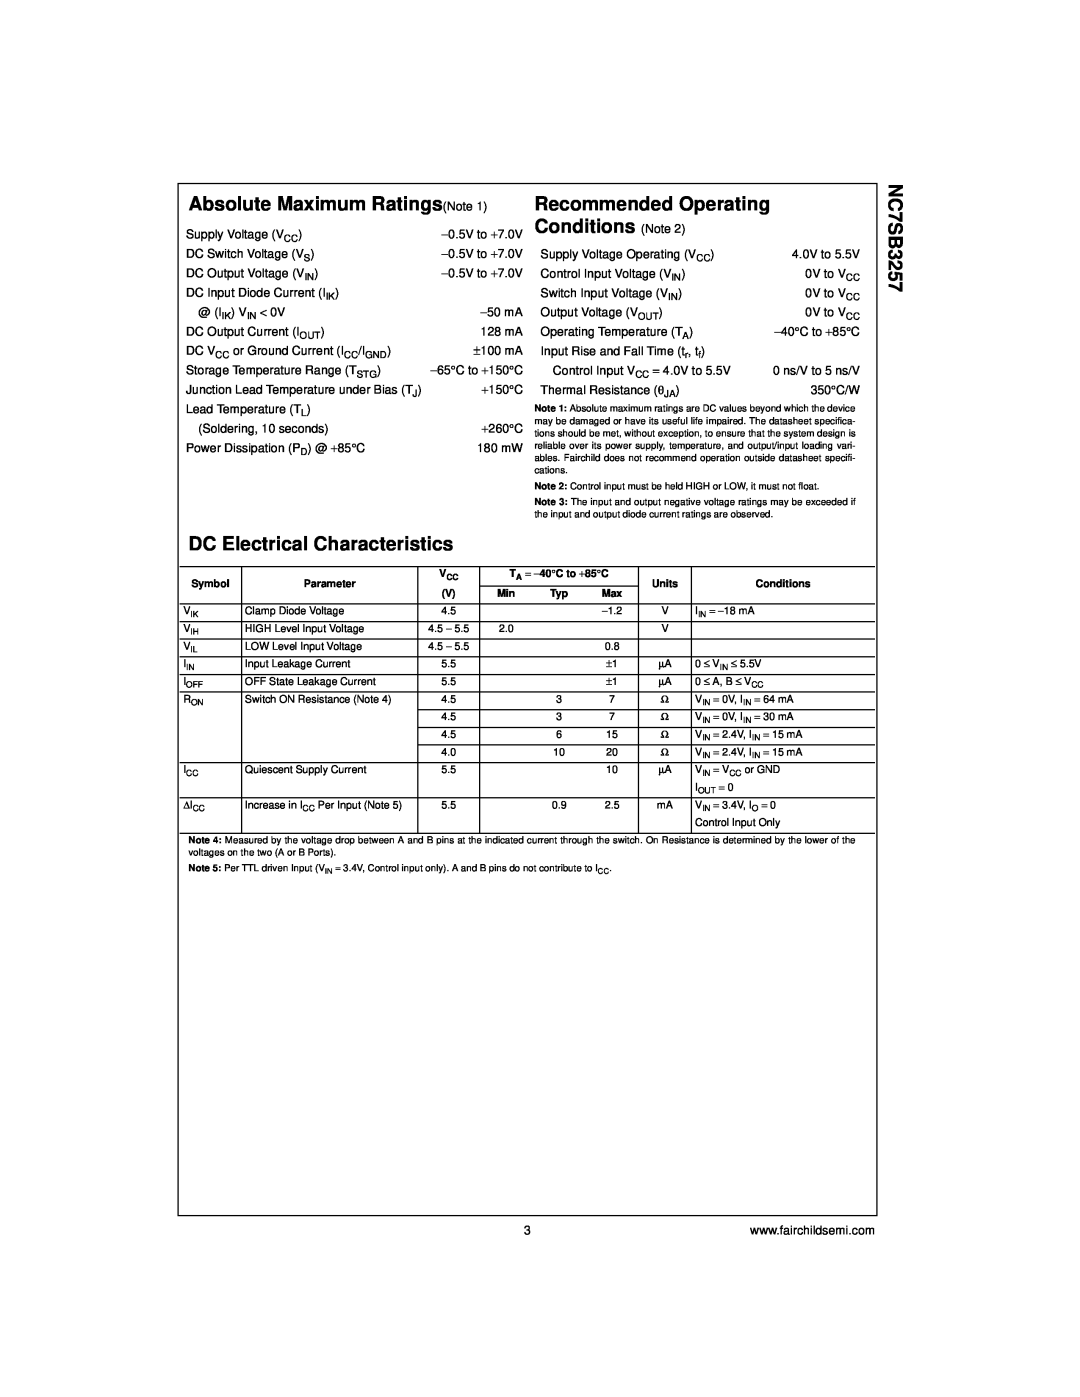 Fairchild NC7SB3257 Absolute Maximum RatingsNote, DC Electrical Characteristics, Recommended Operating Conditions Note 